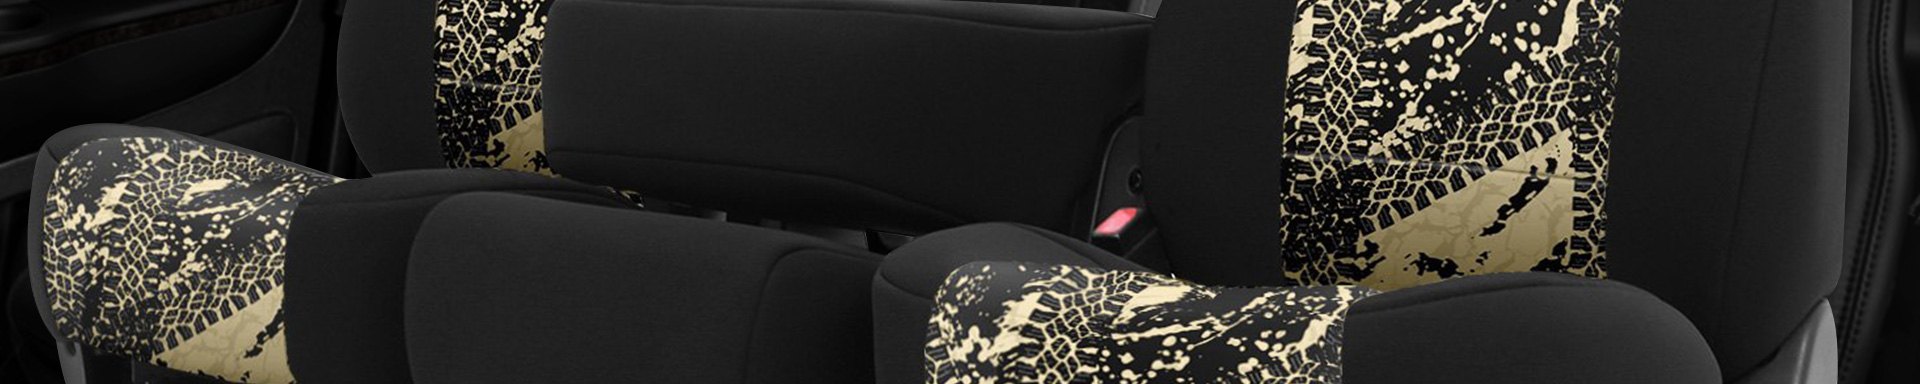 Coverking Now Offers Cool Tire Track Print Patterns on Their Neosupreme Seat Covers